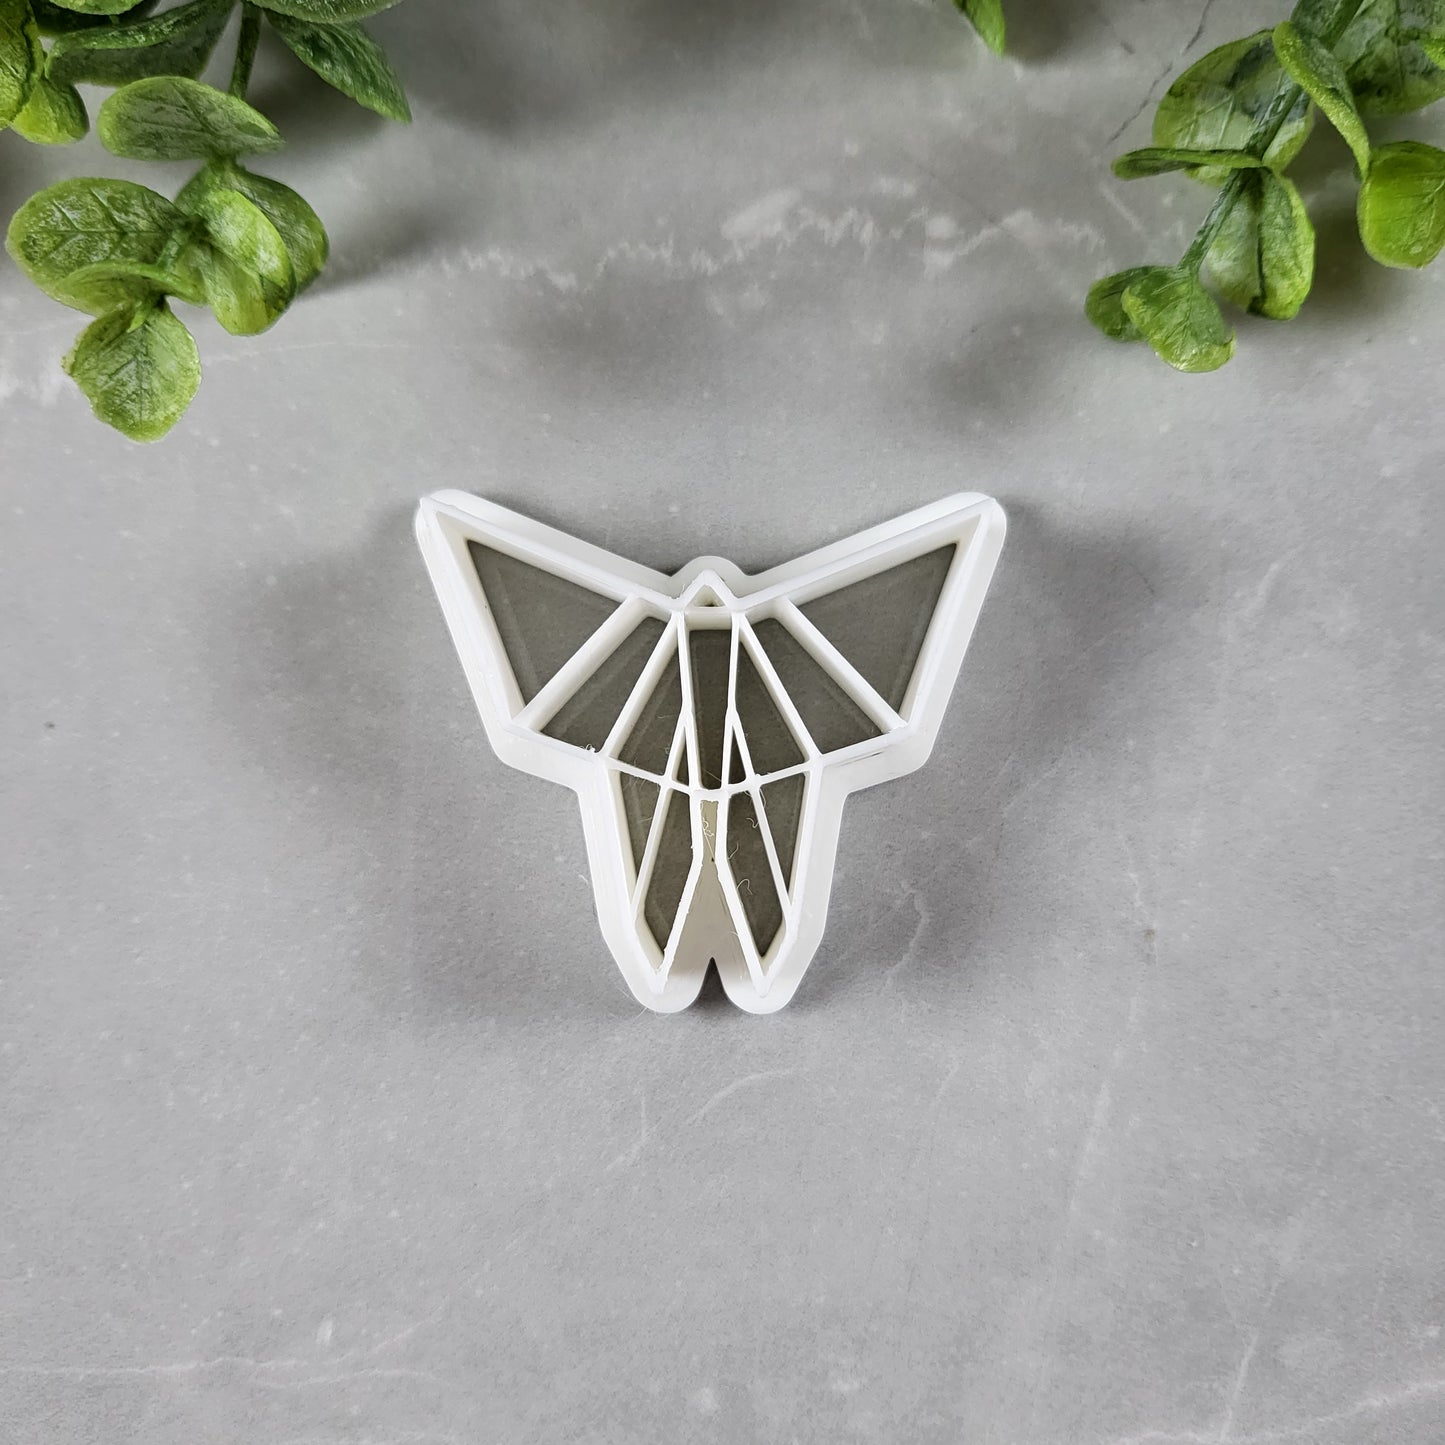 Origami Butterfly 2 Clay Cutter